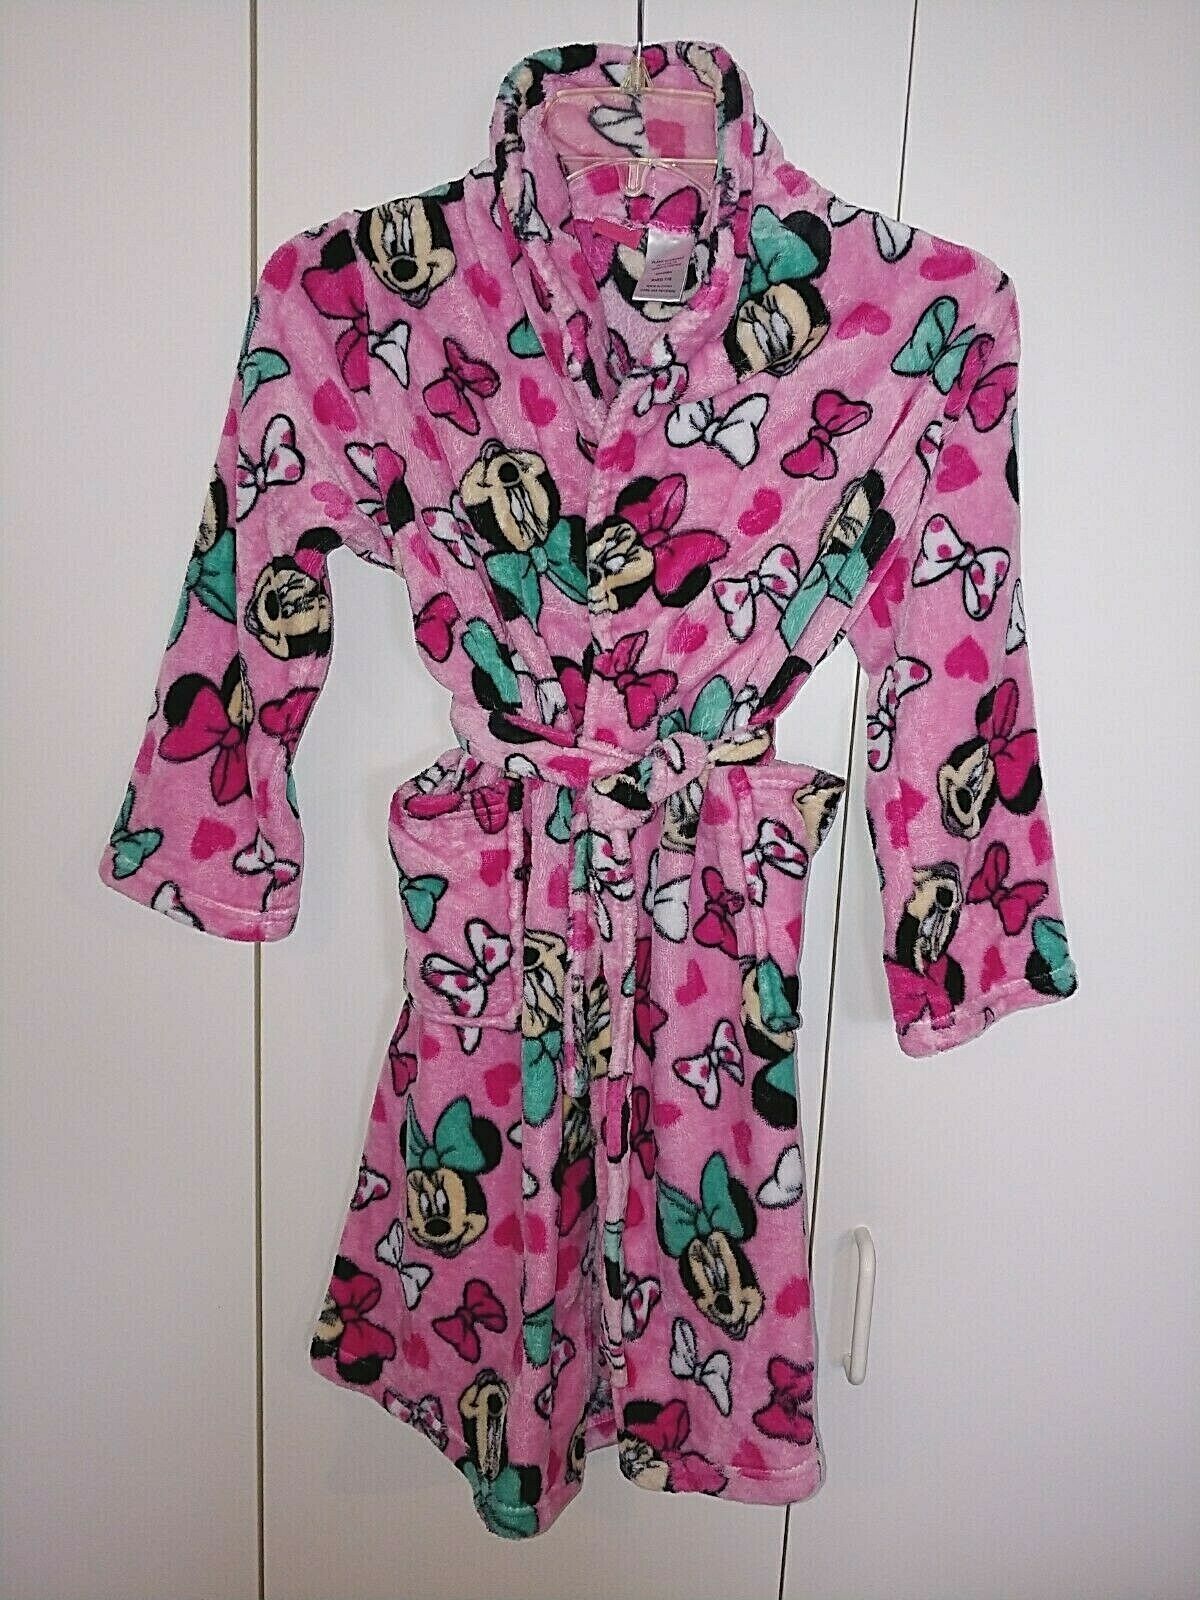 DISNEY GIRL'S 100% POLYESTER PINK MINNIE MOUSE FLEECE ROBE-7/8-WORN ONCE-WARM - $13.99